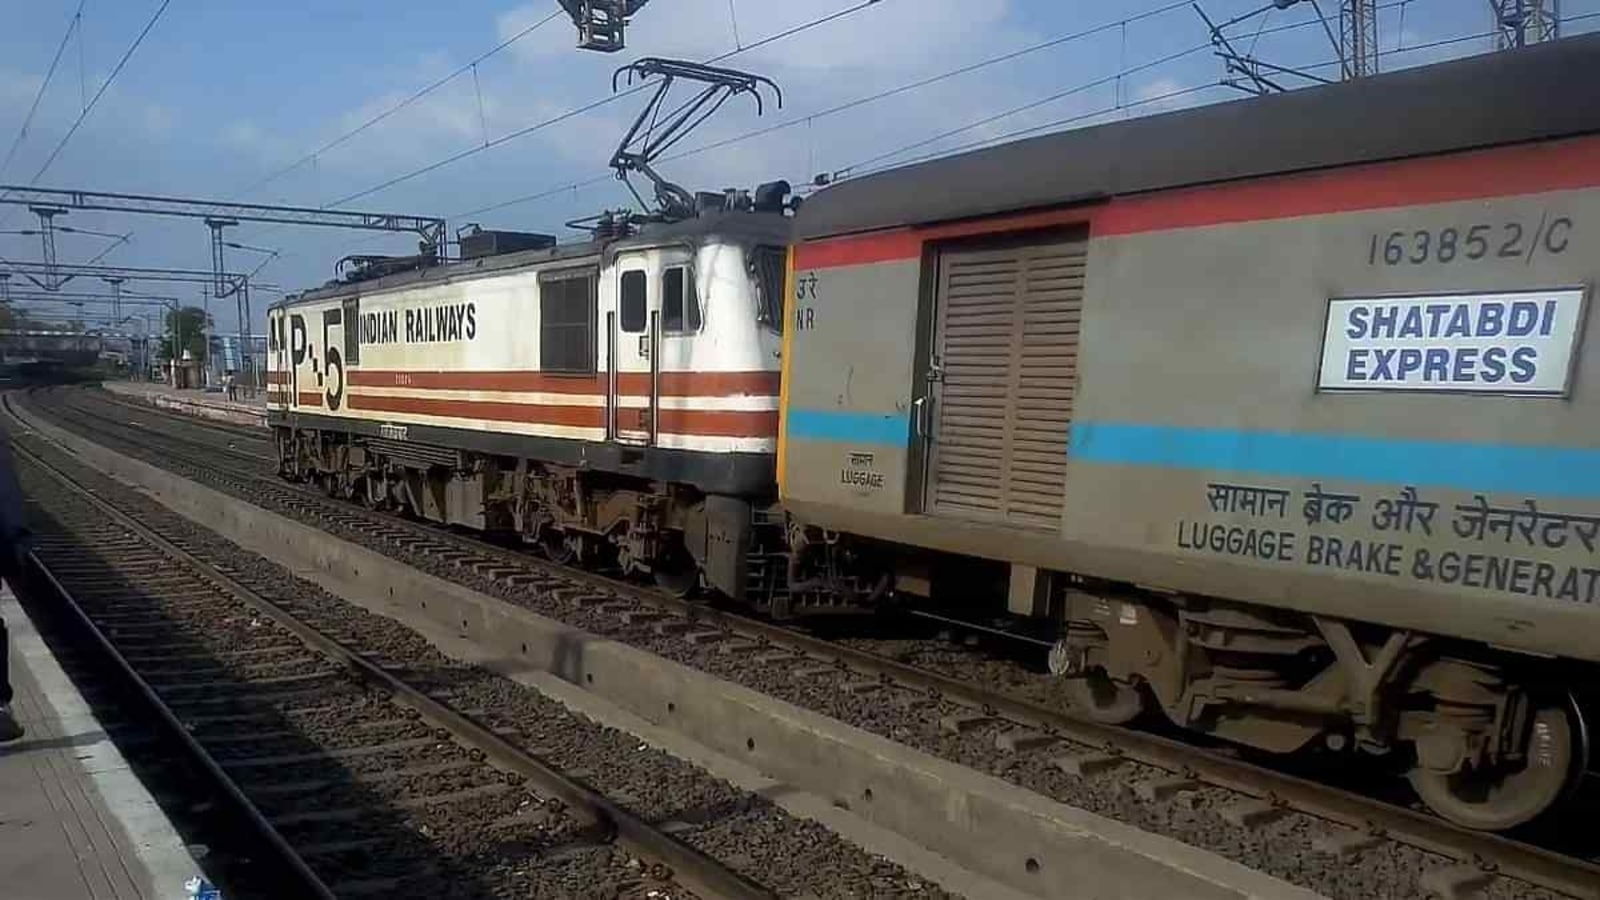 Bengaluru-Chennai Shatabdi Express to get back on track from July 21 |  Latest News India - Hindustan Times